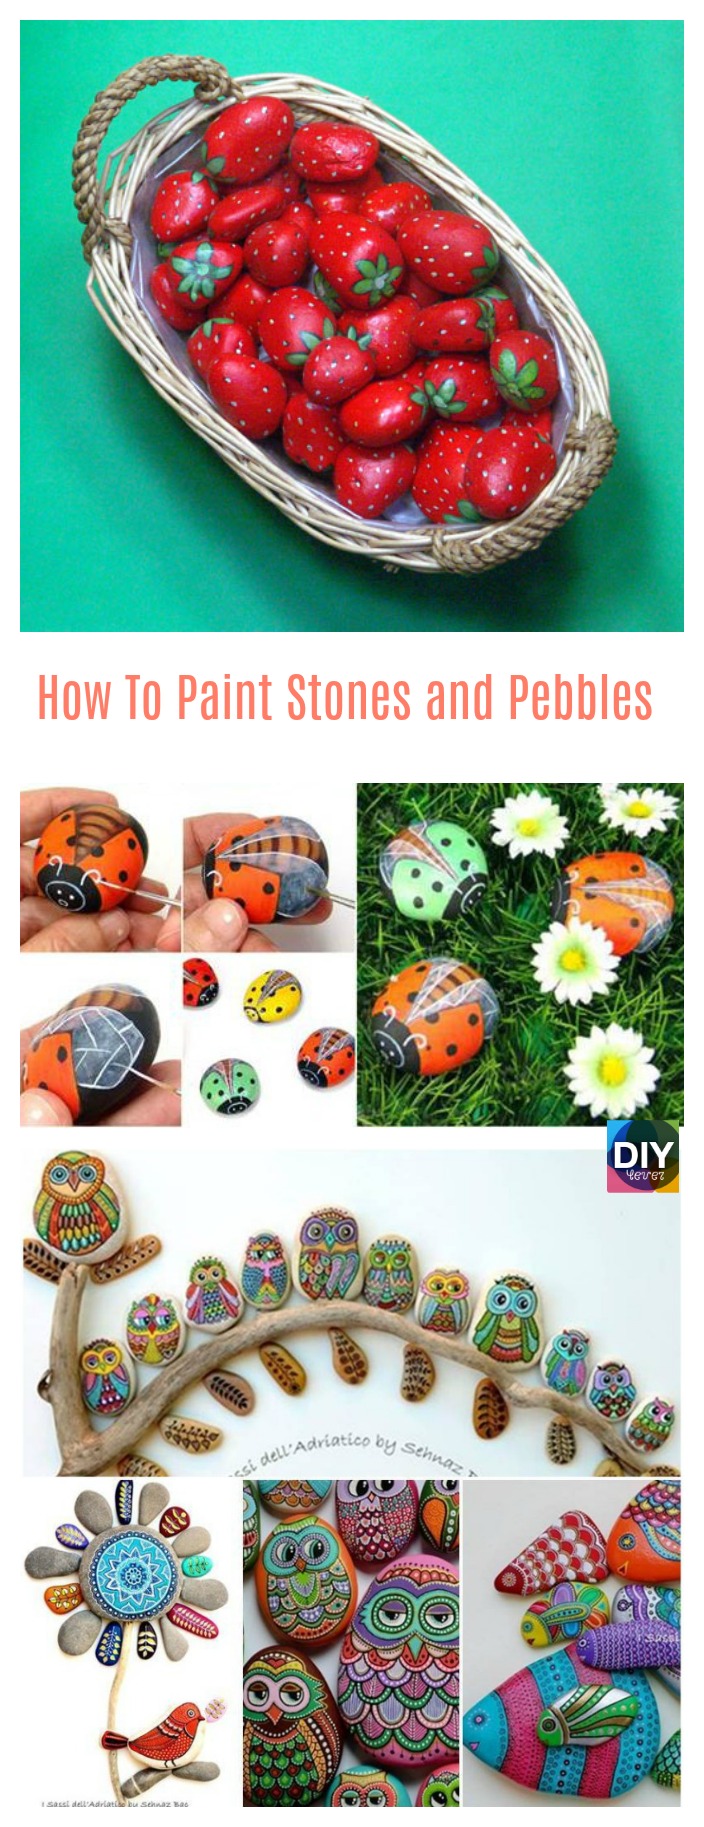 diy4ever- How To Paint Stones and Pebbles